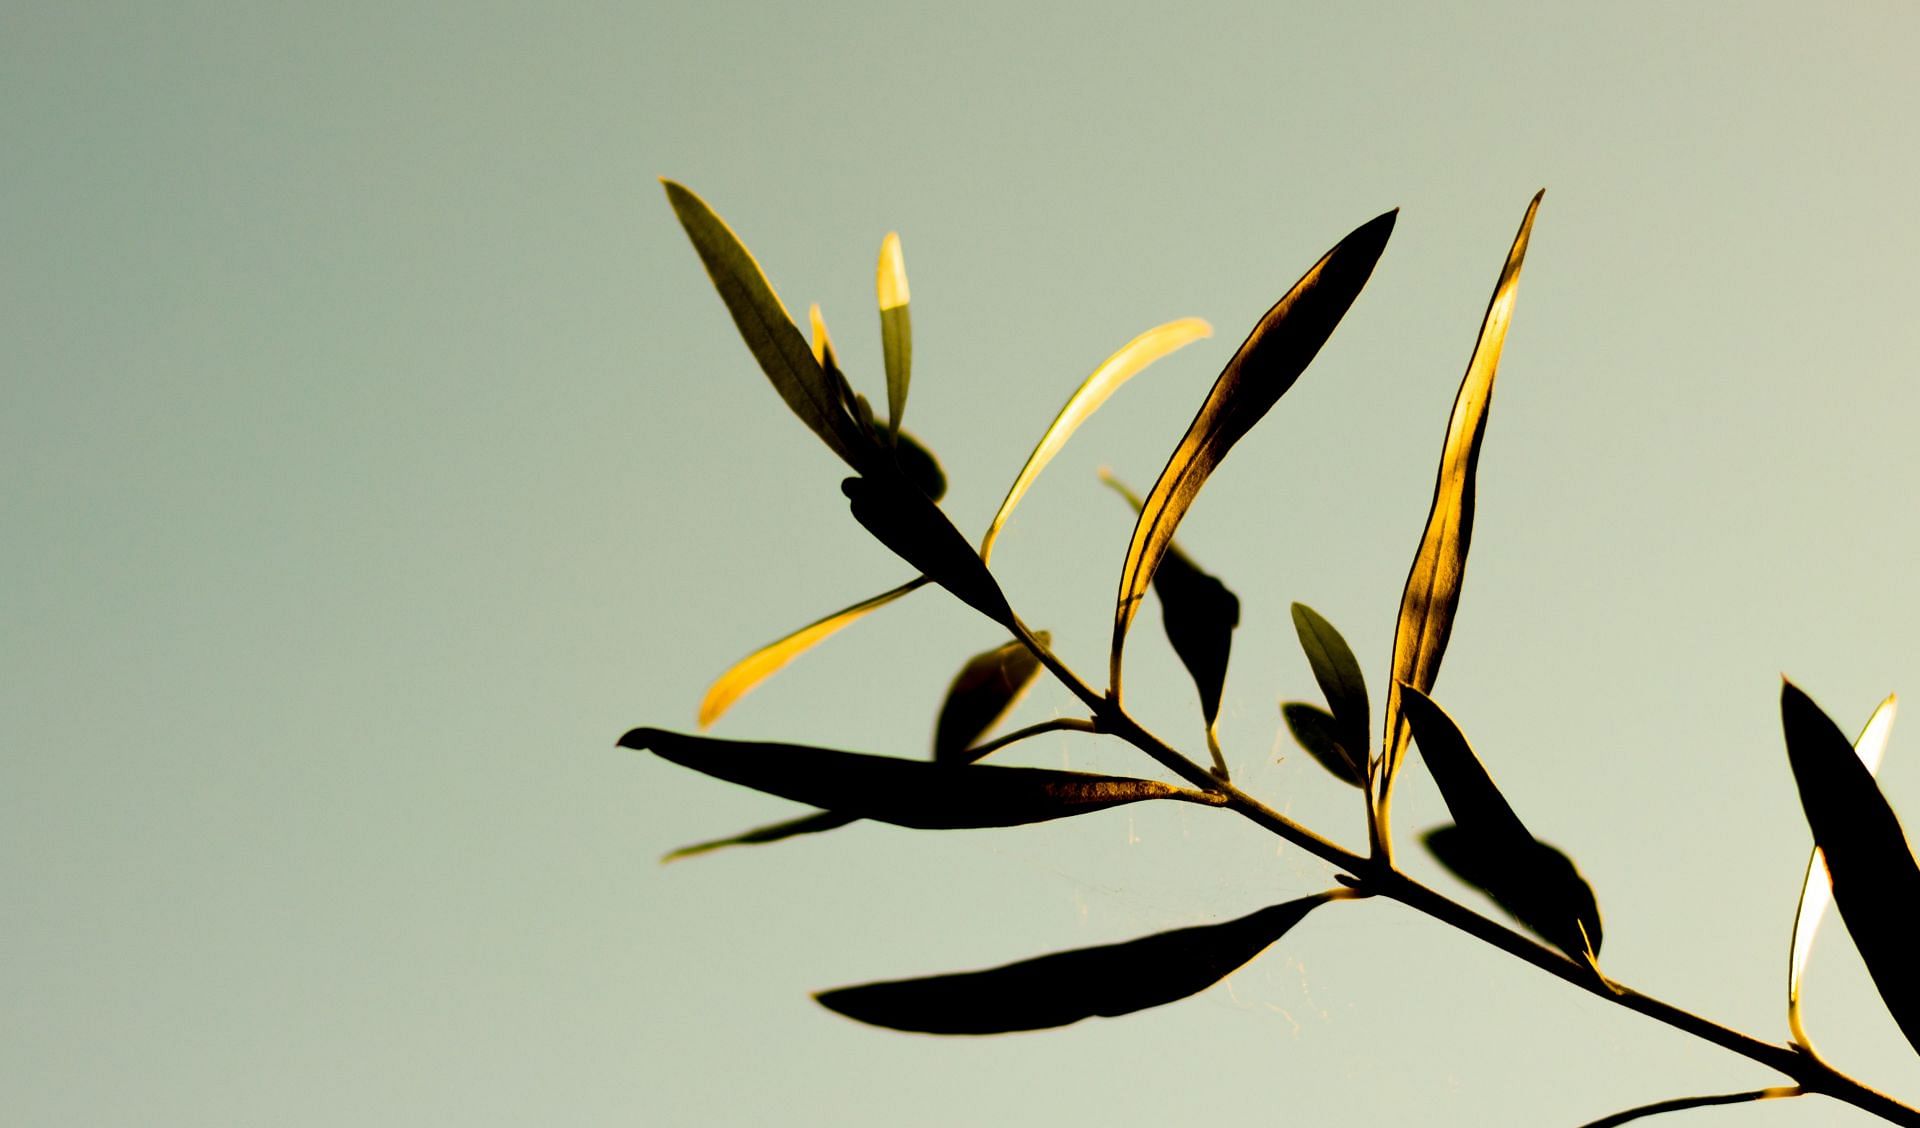 Olive leaf extract benefits have been gaining popularity (Imaaage via Unsplash/Jeremy Perkins)